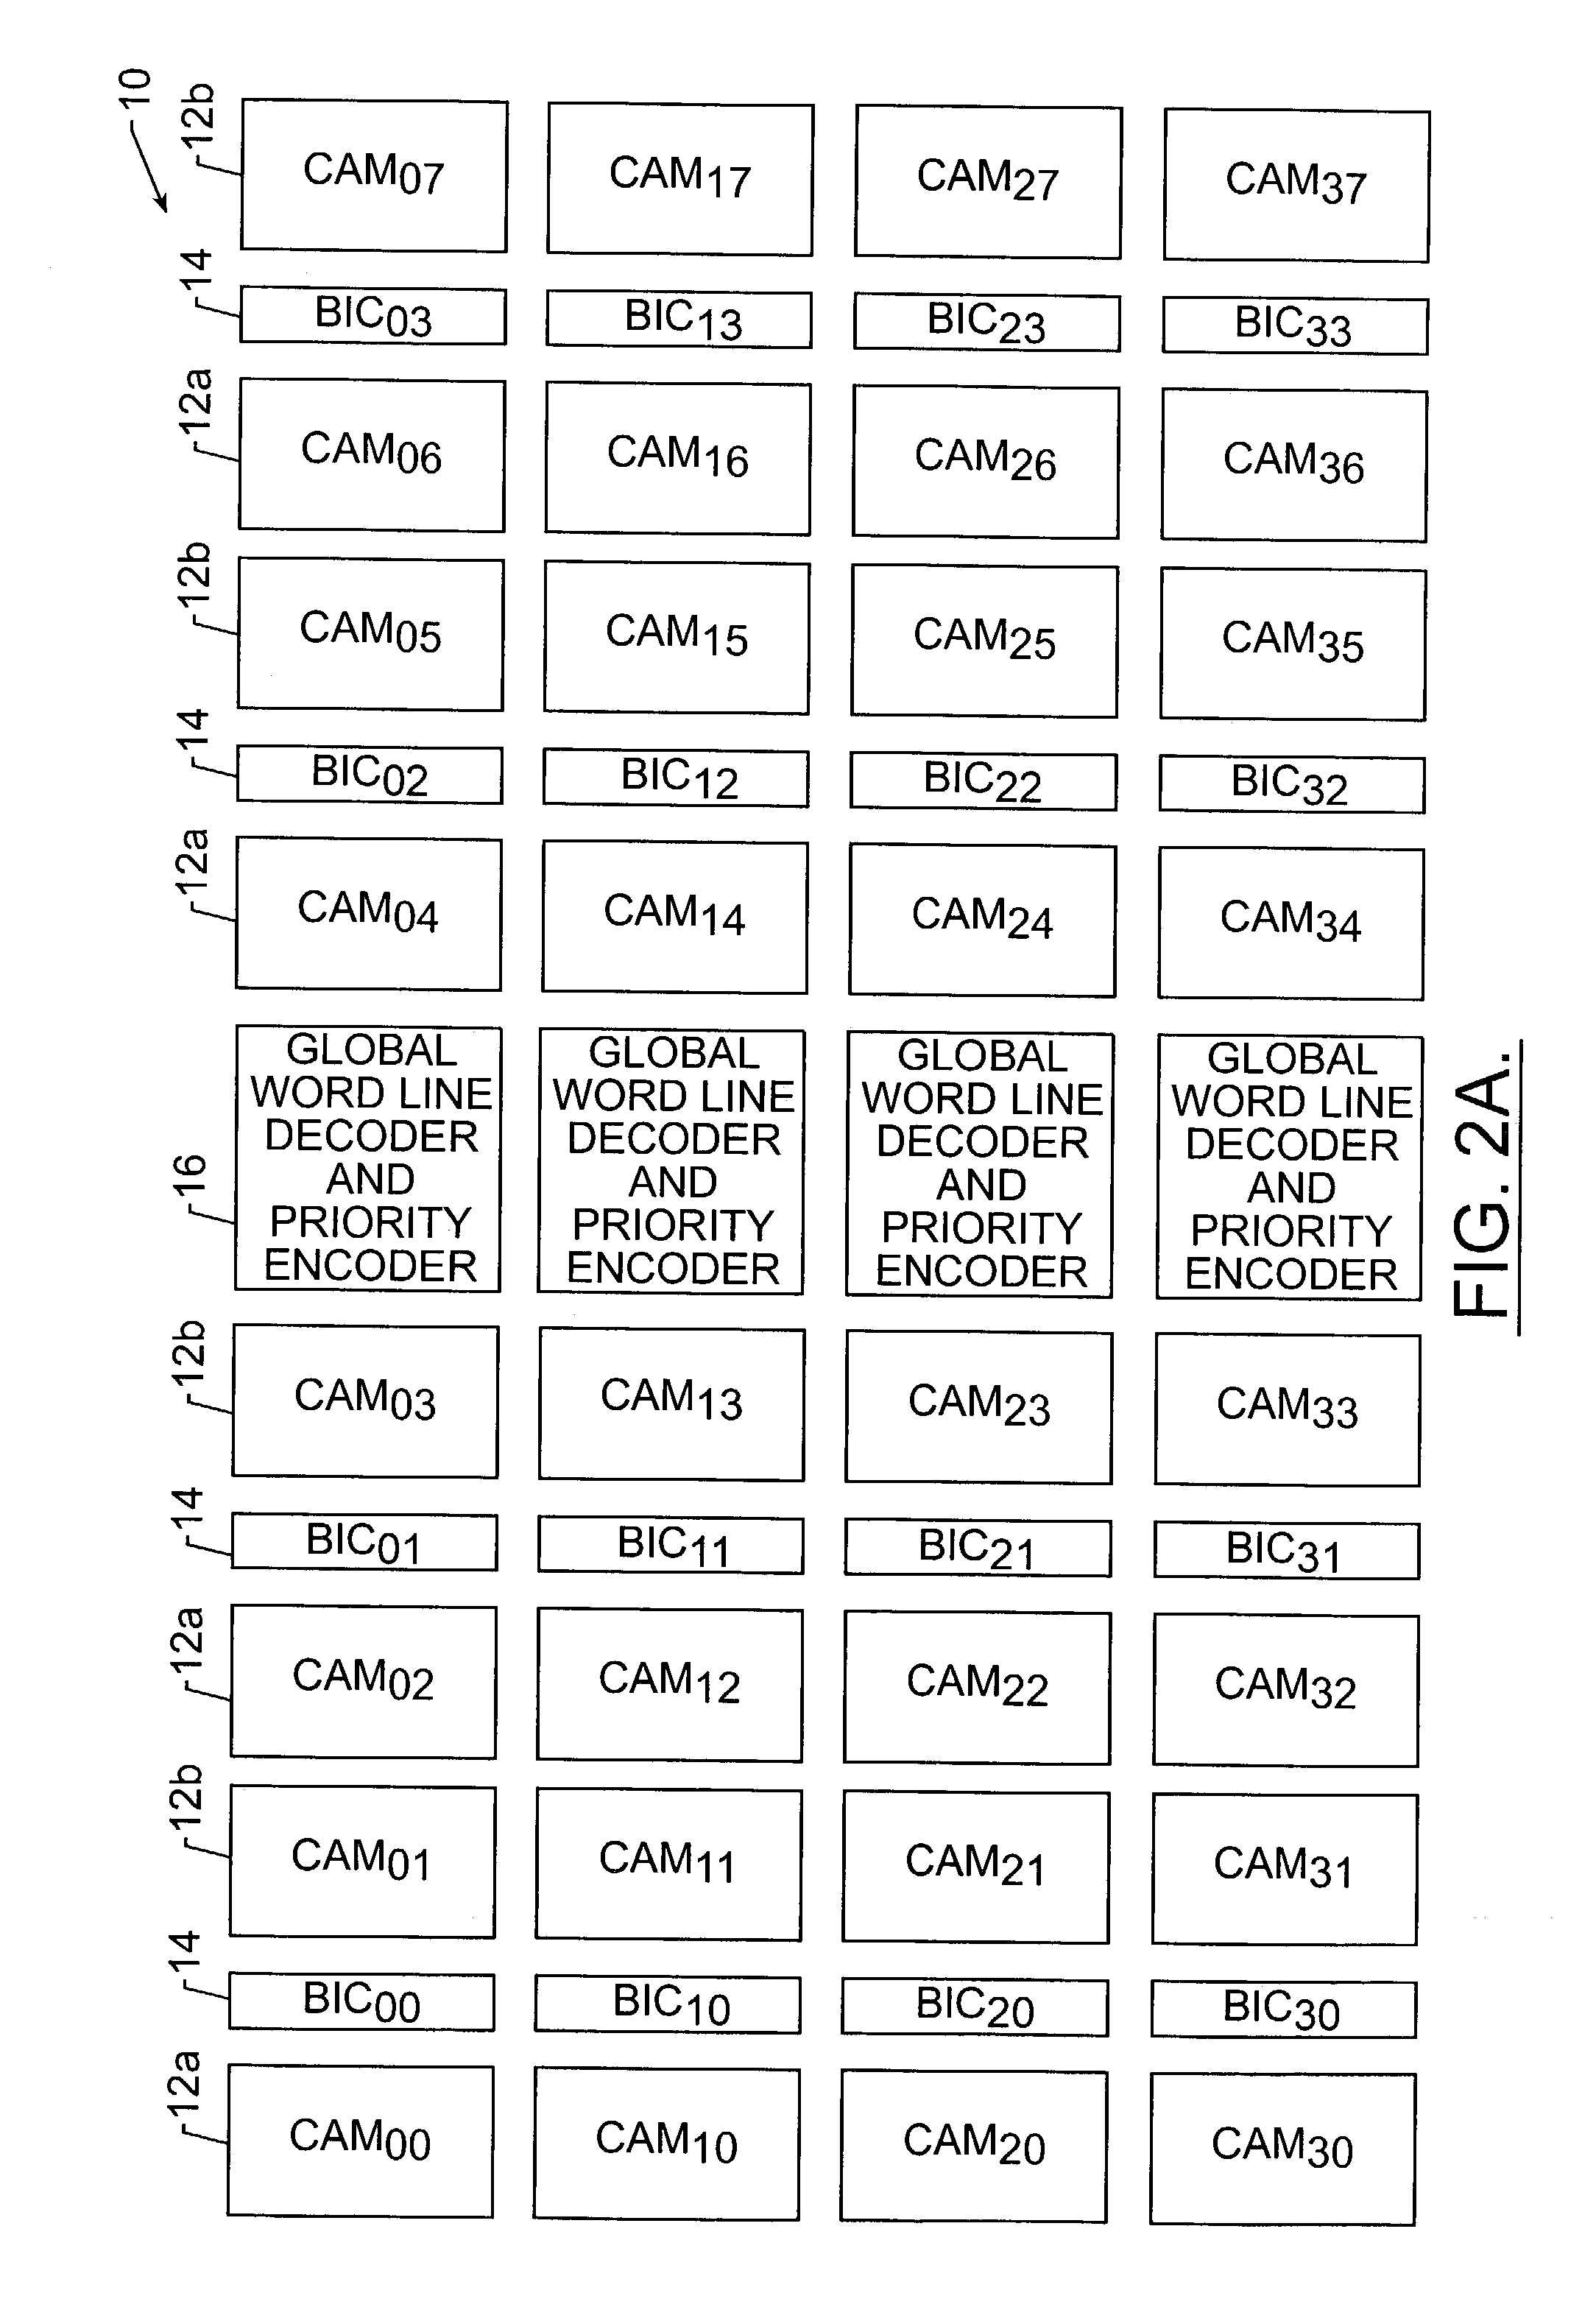 Content addressable memory (CAM) devices that utilize priority class detectors to identify highest priority matches in multiple CAM arrays and methods of operating same